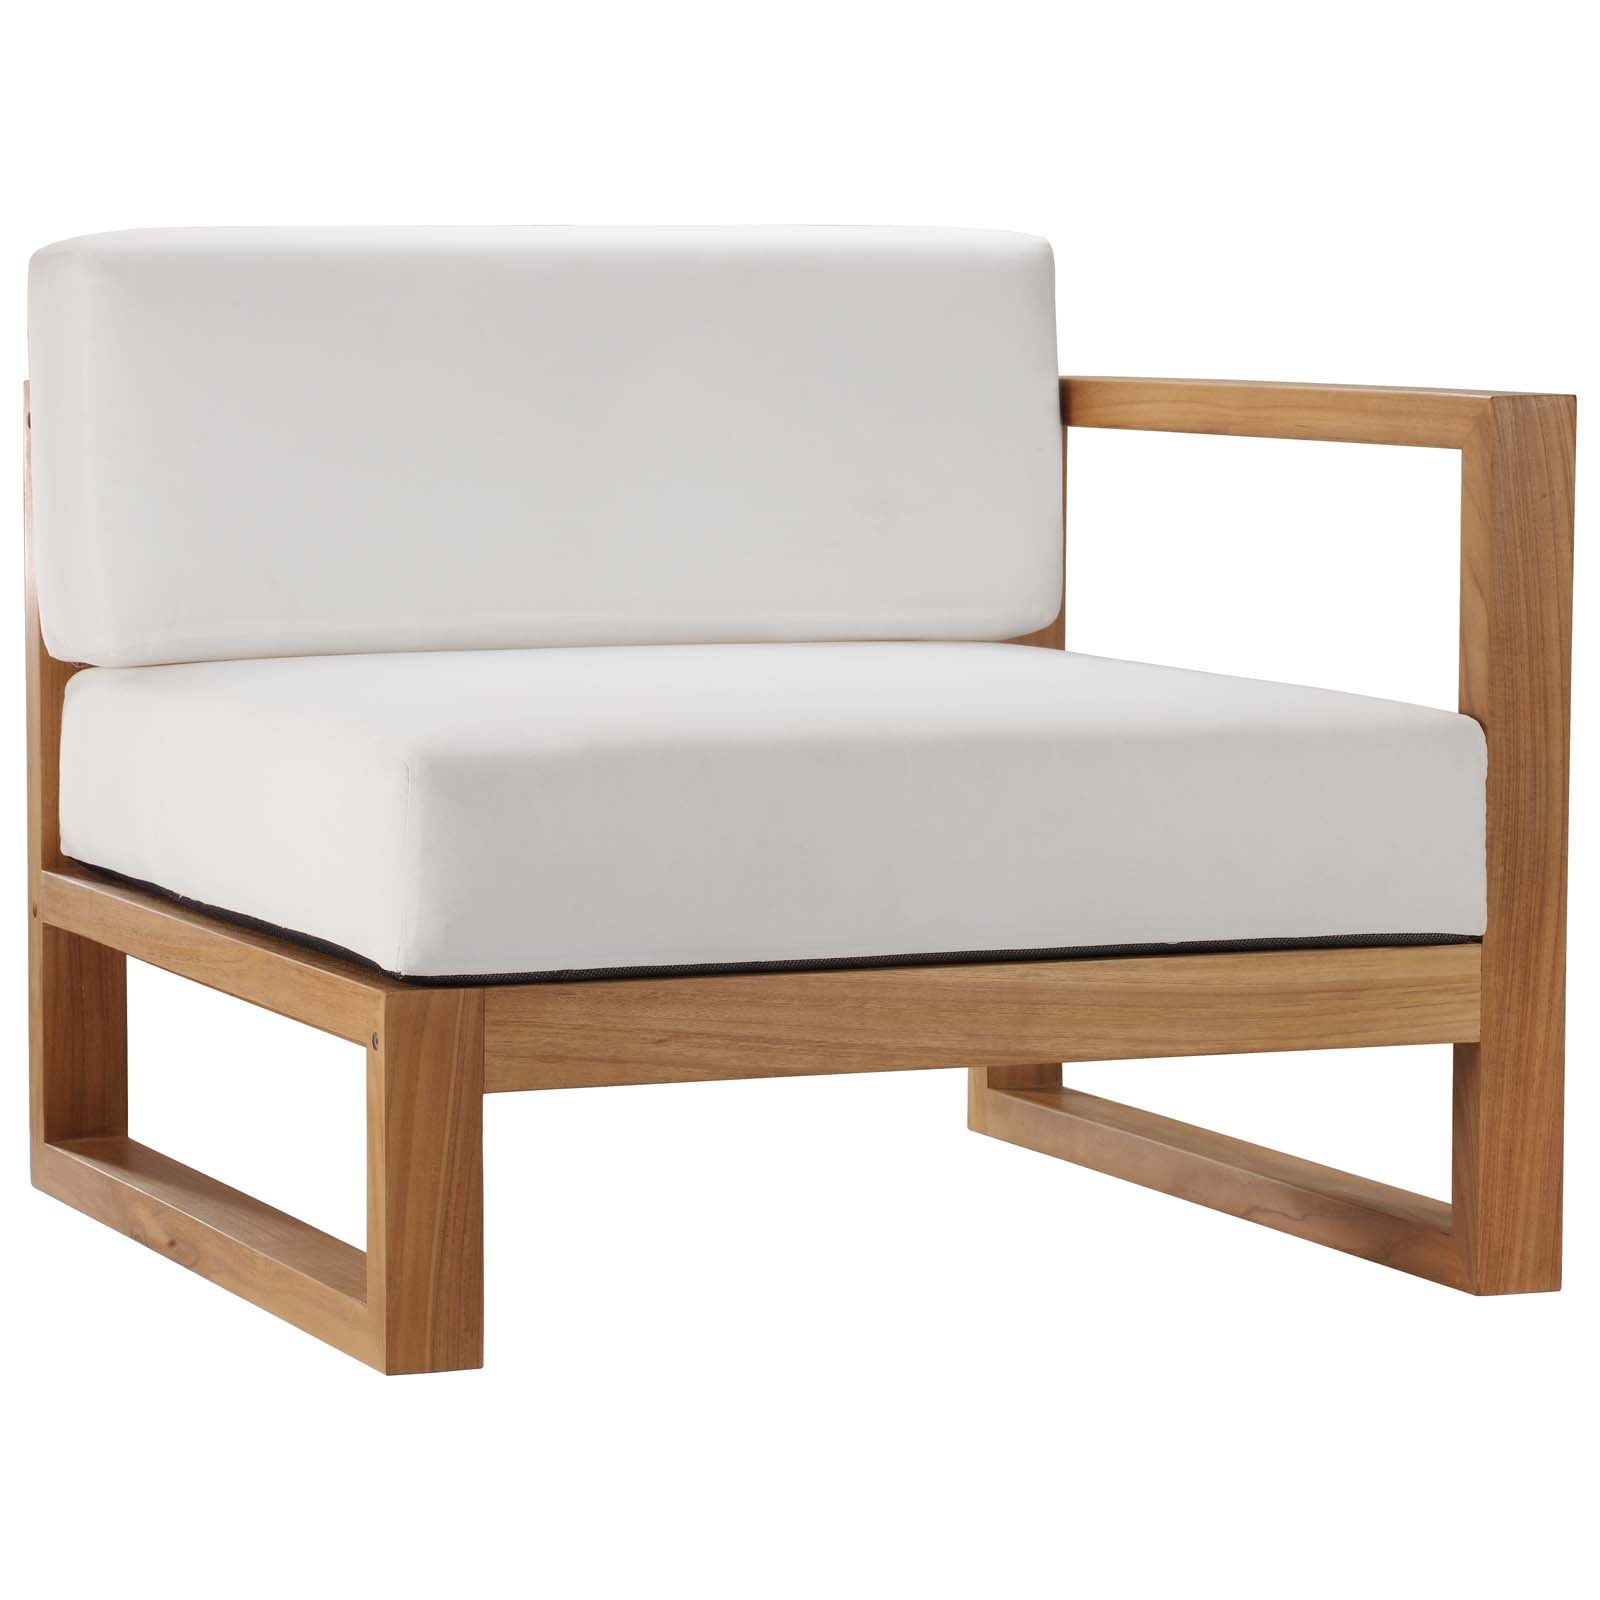 Modway Outdoor Conversation Sets - Upland Outdoor Patio Teak Wood 2 Piece Sectional Sofa Loveseat Natural White